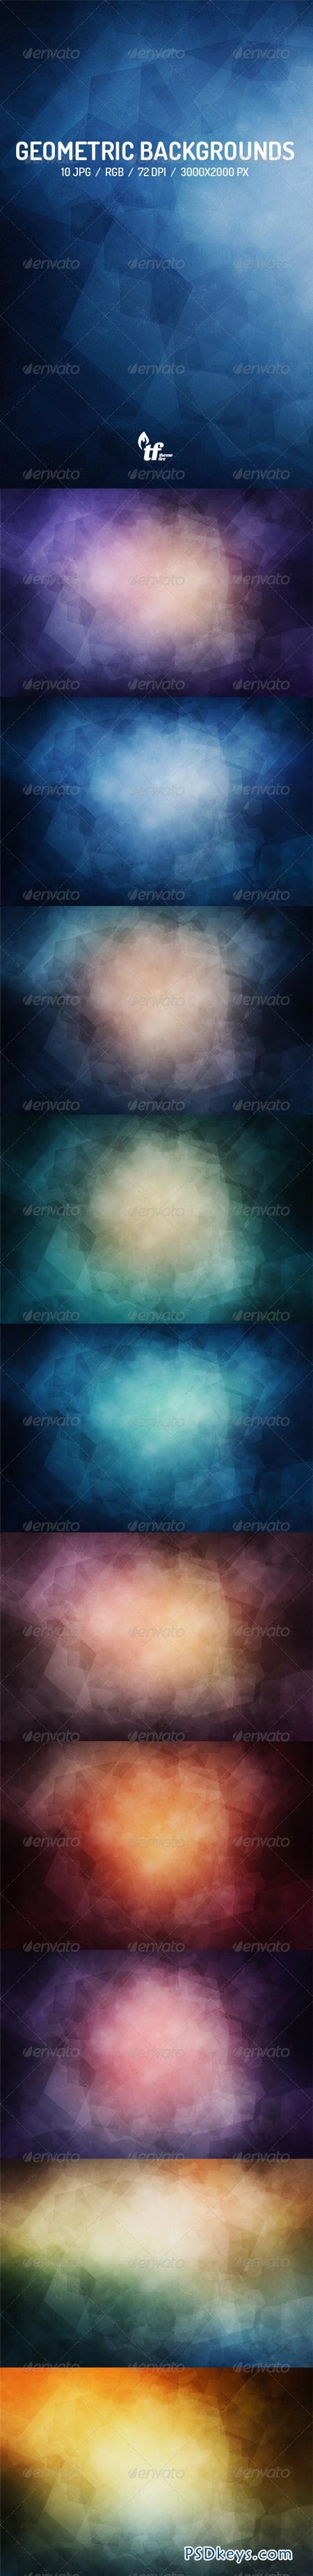 10 Abstract Geometric Backgrounds 7848017